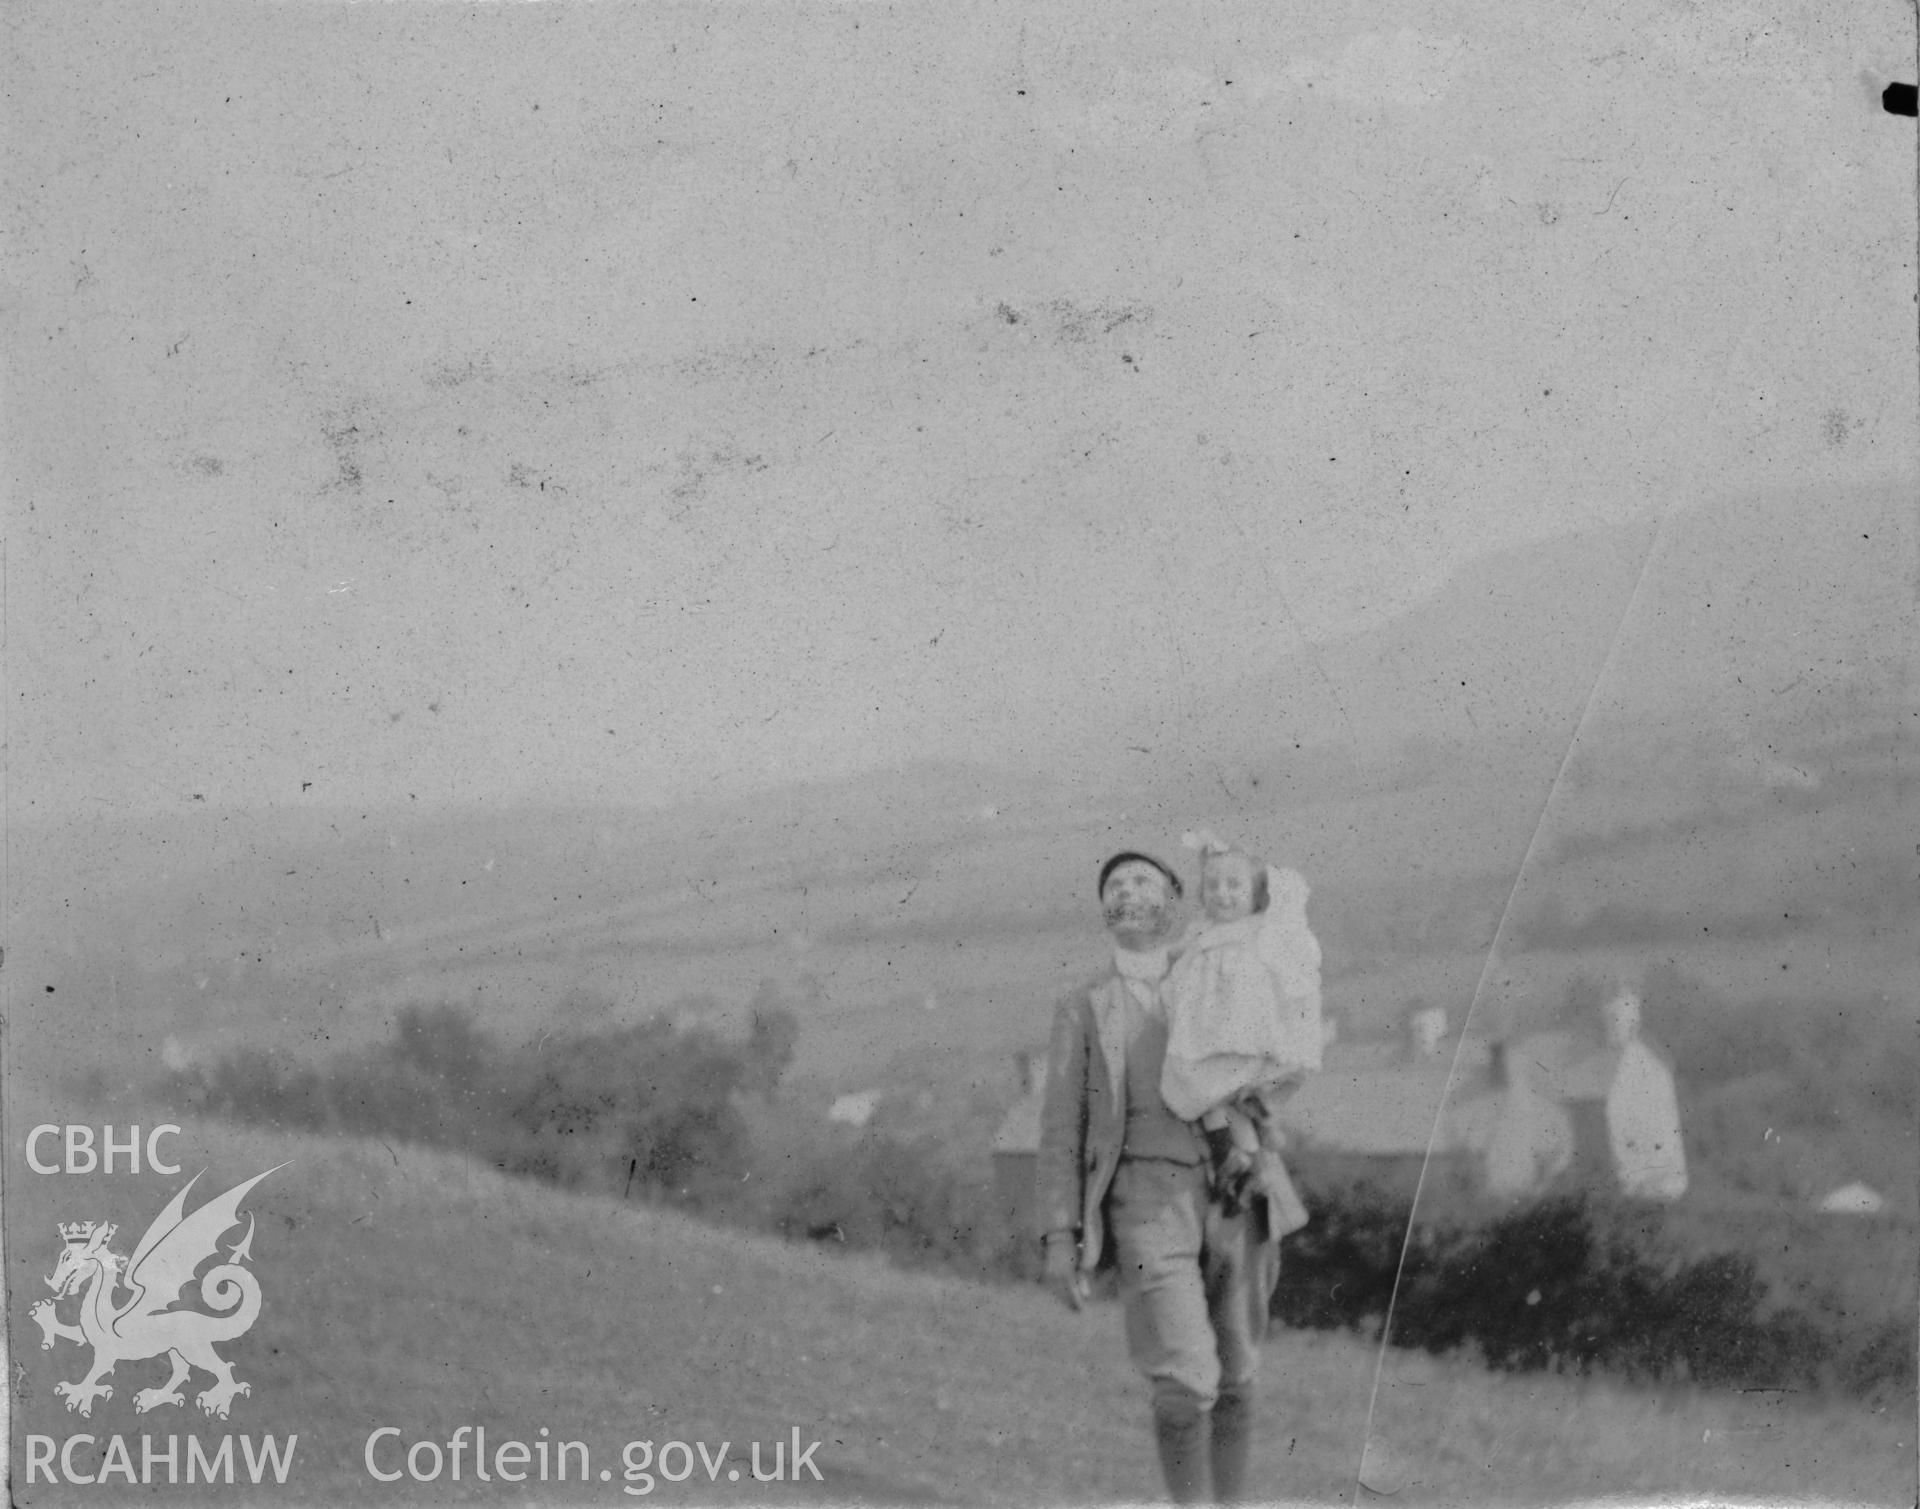 "Pontardulais 1903". Photo showing an adult carrying a child, digitised from a photograph album showing views of Aberystwyth and District, produced by David John Saer, school teacher of Aberystwyth. Loaned for copying by Dr Alan Chamberlain.